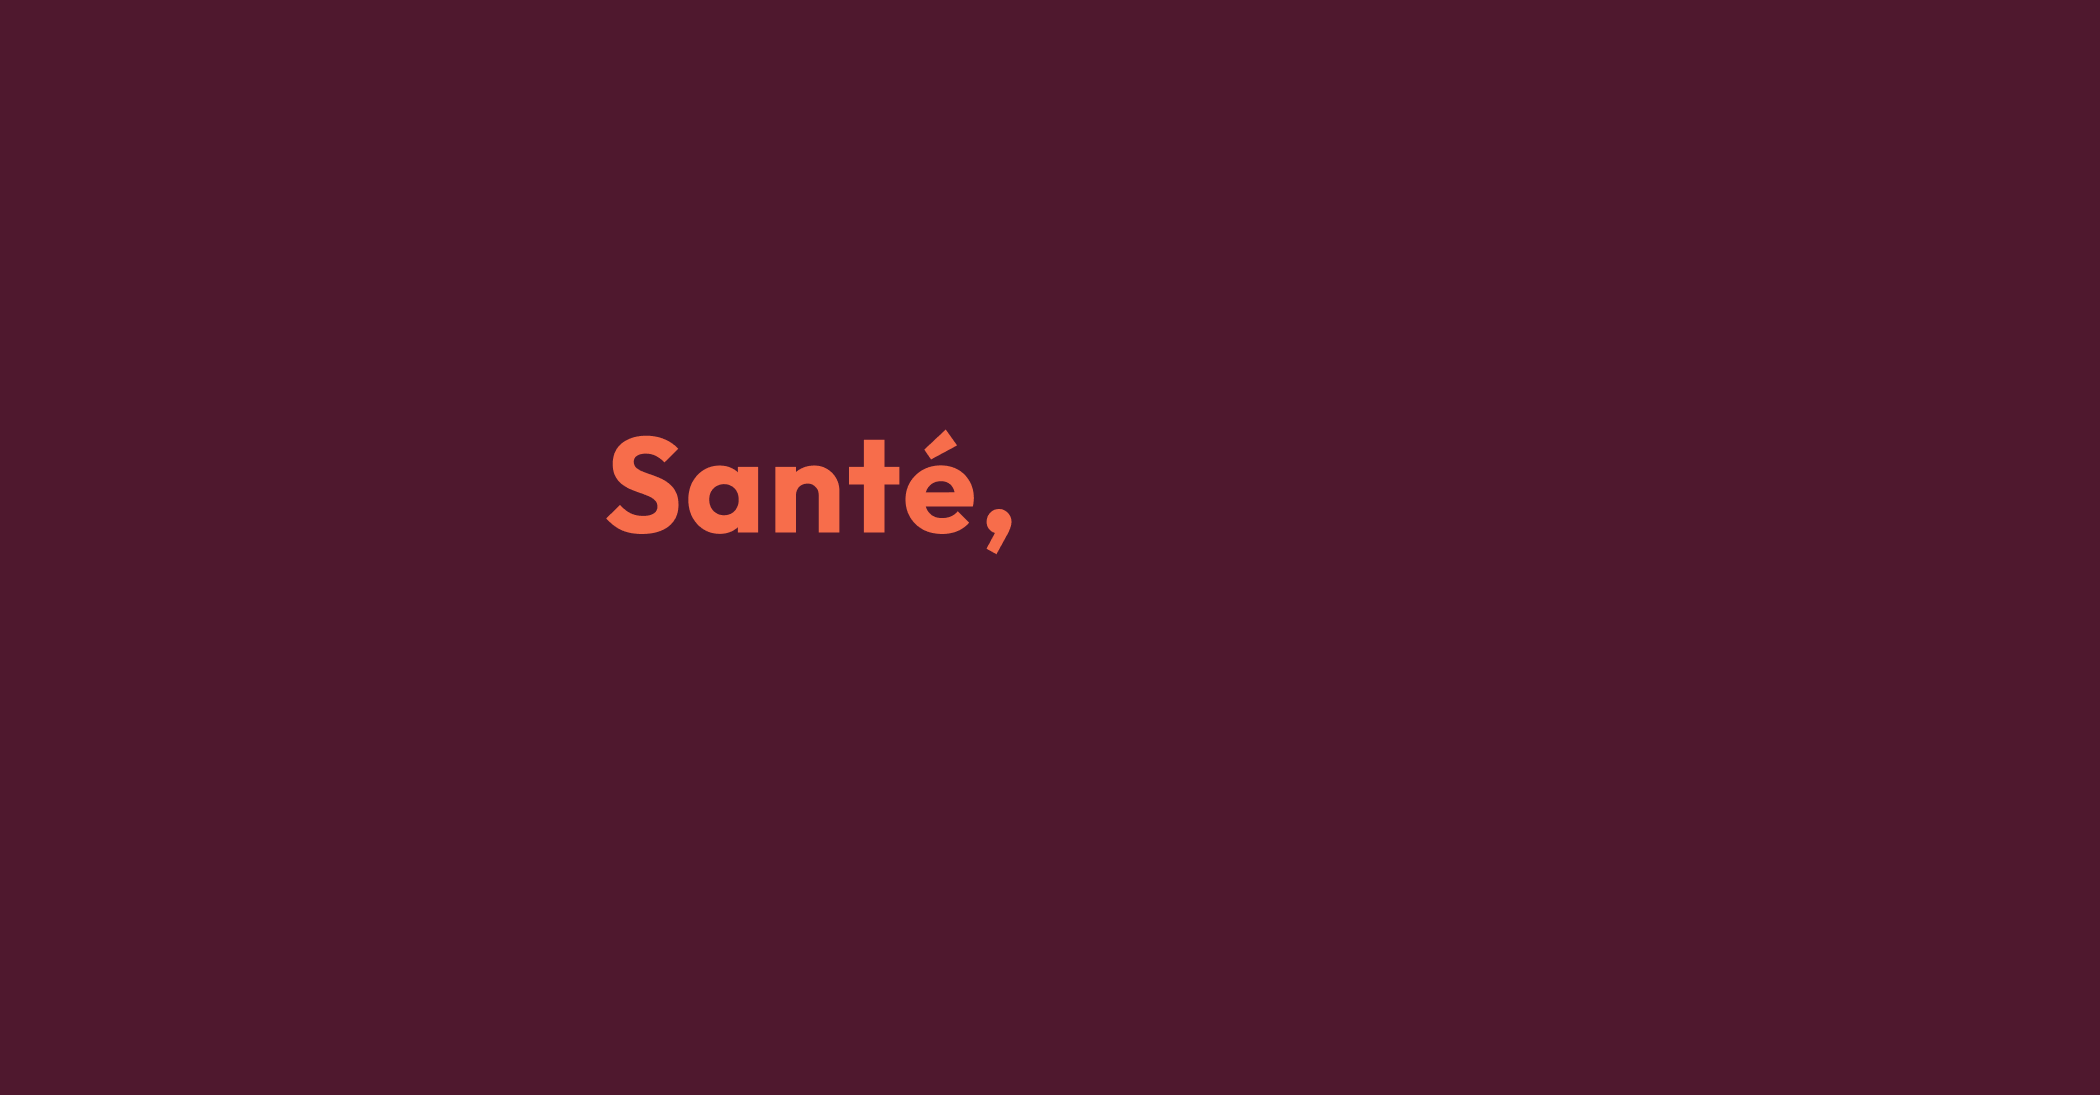 Animated GIF of orange text on a dark purple background. Words appear one at a time. It says “Health, beauty and comfort”. 